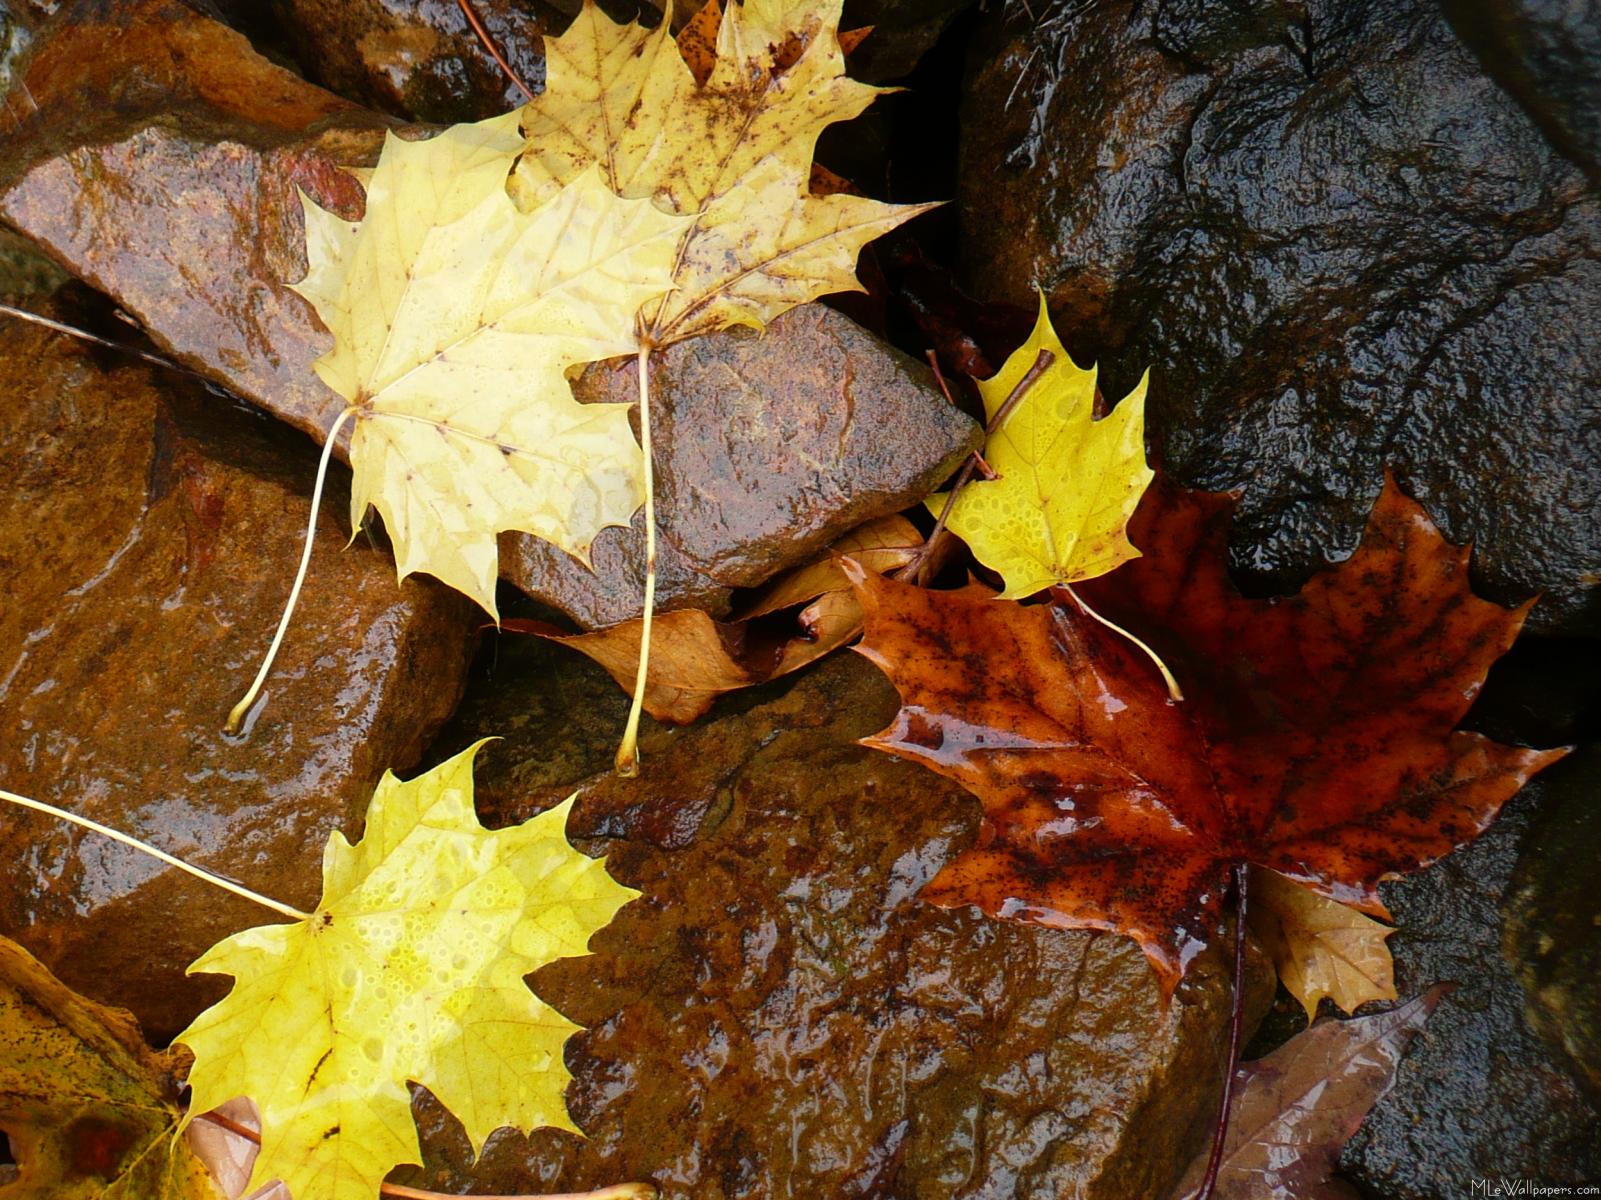 MLeWallpapers.com - Wet Leaves and Rocks